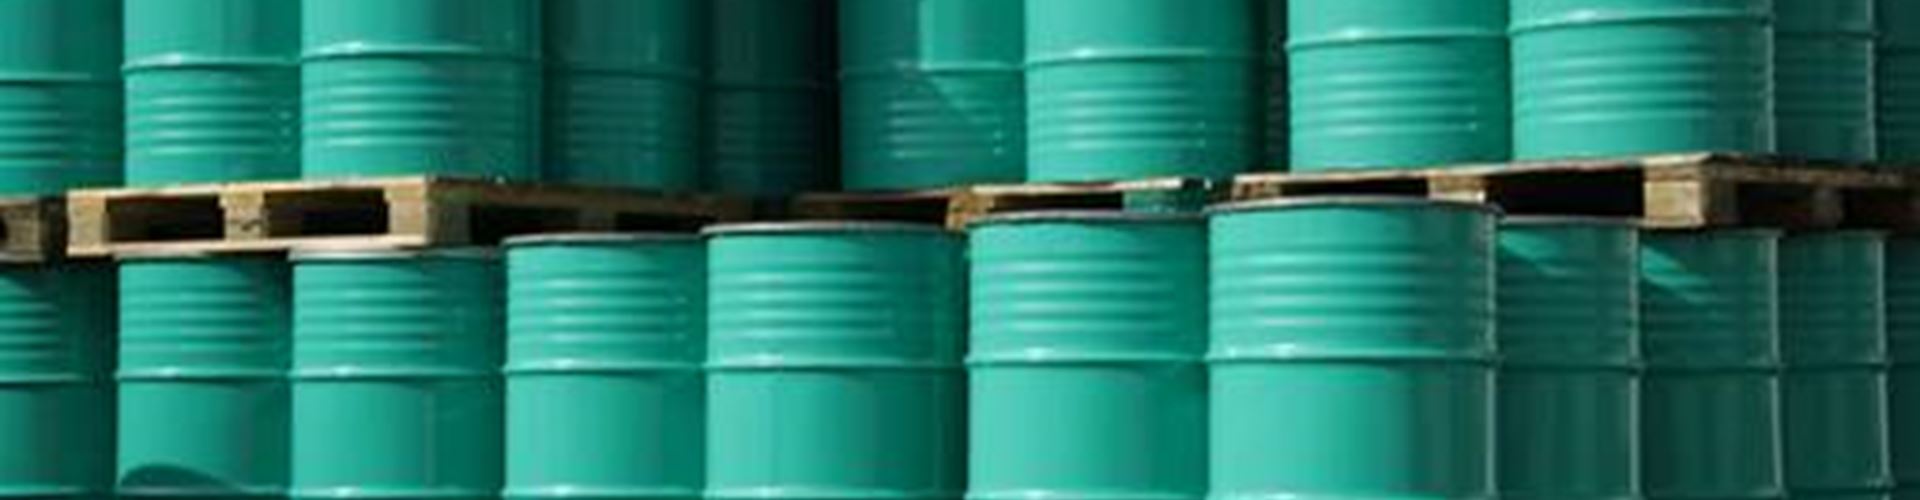 Oil excess hits record high of 3bn barrels